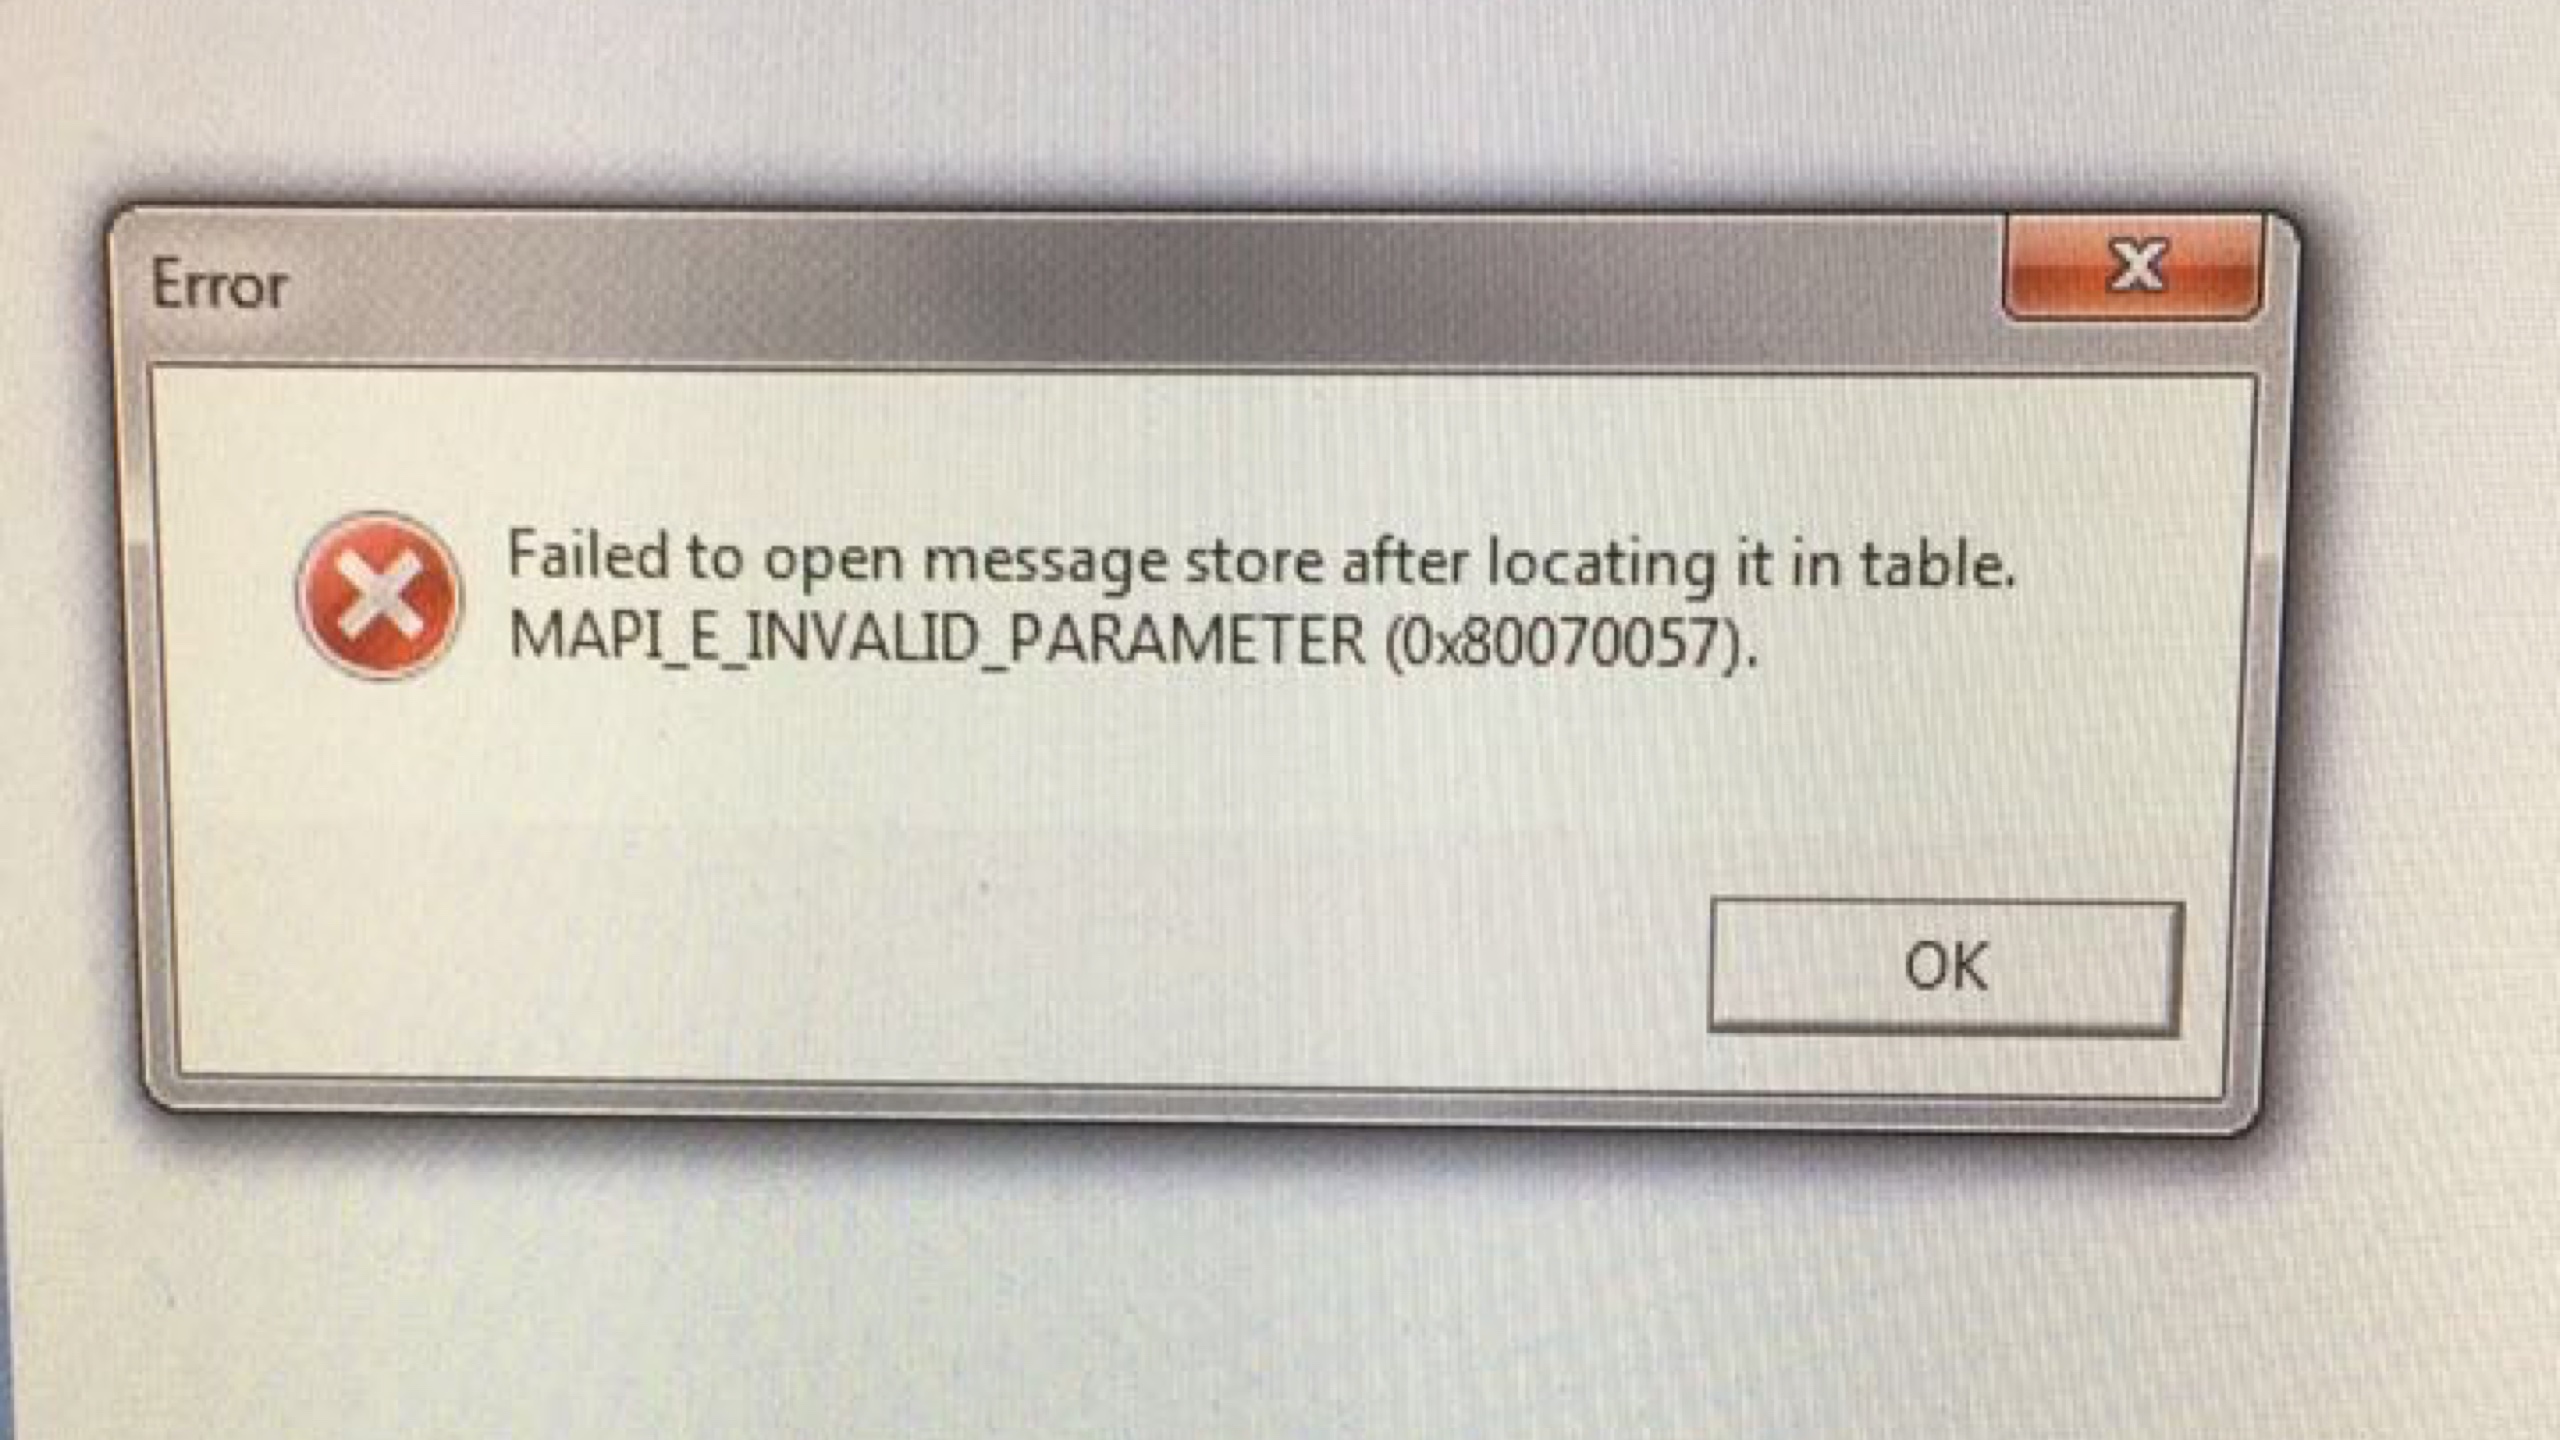 Failed to open message store after locating it in table.